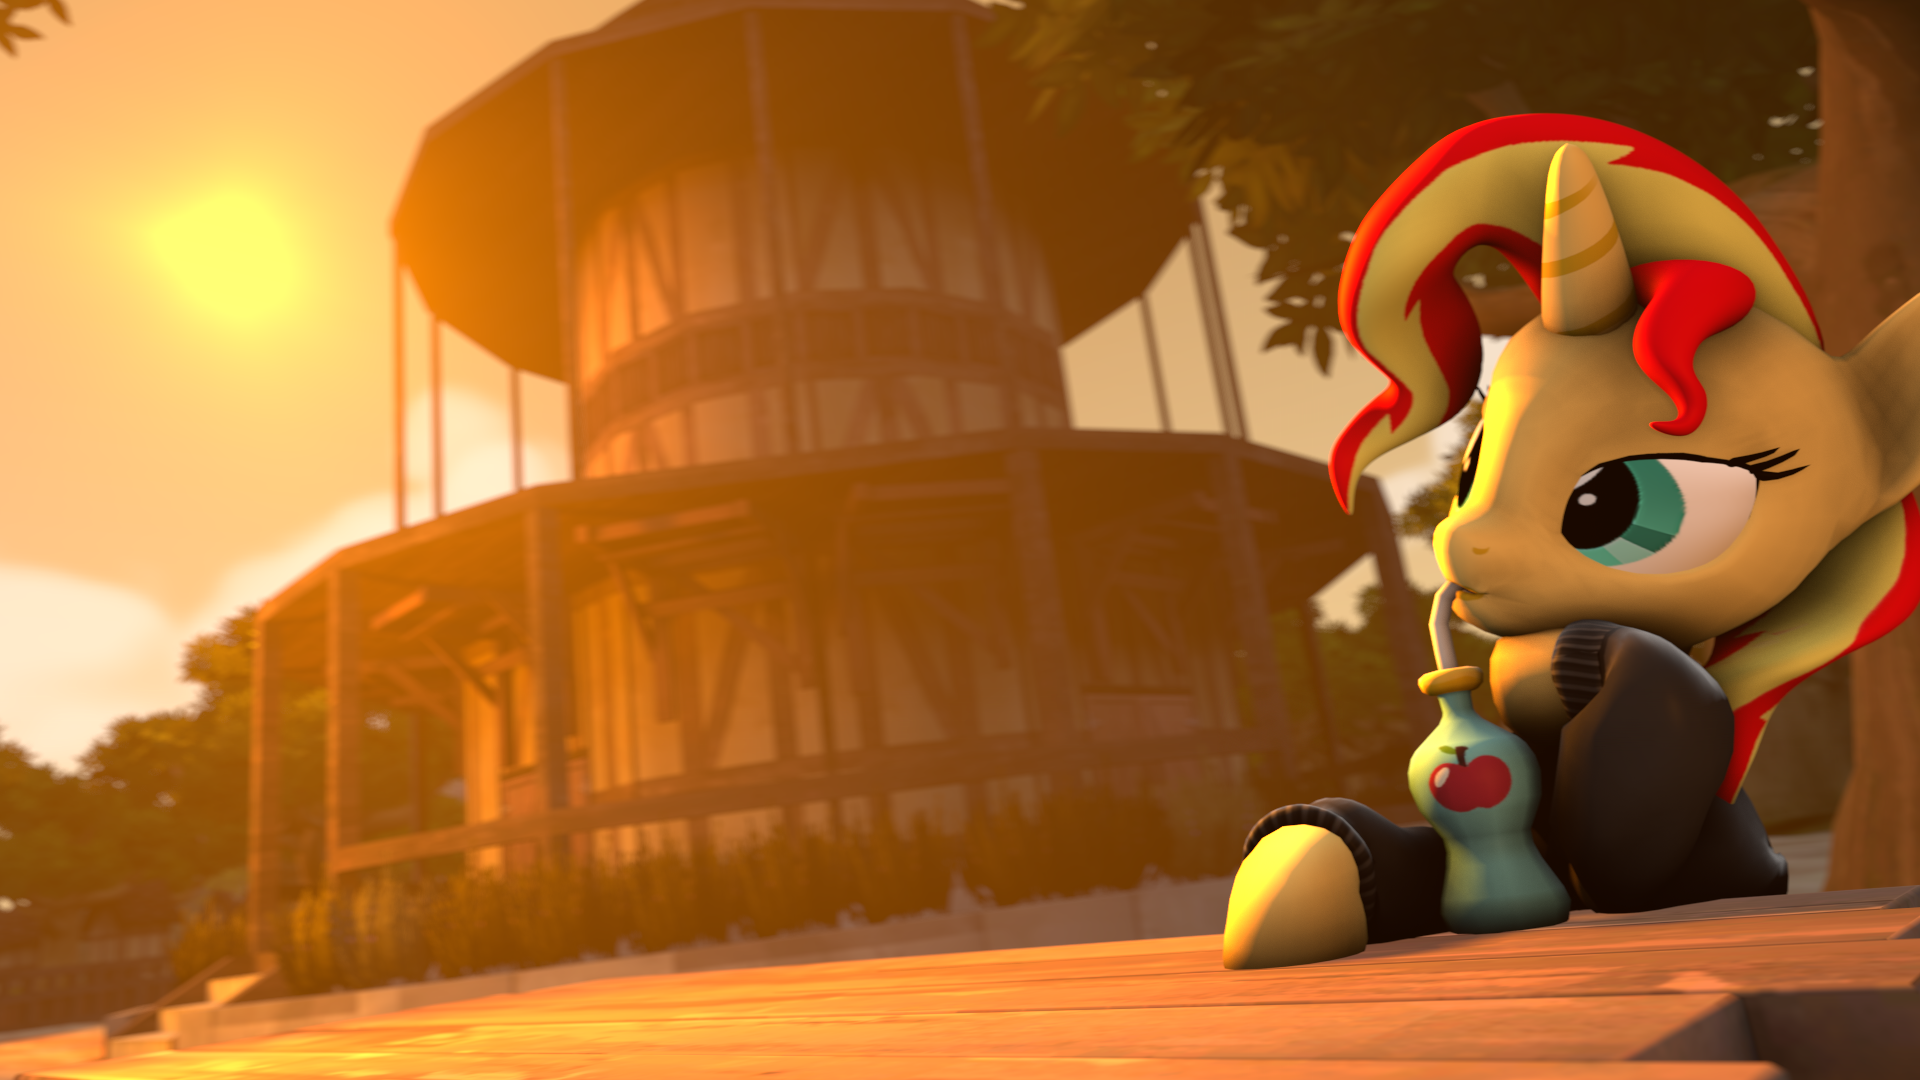 _sfm__drinking_some_juice_in_the_sunset_